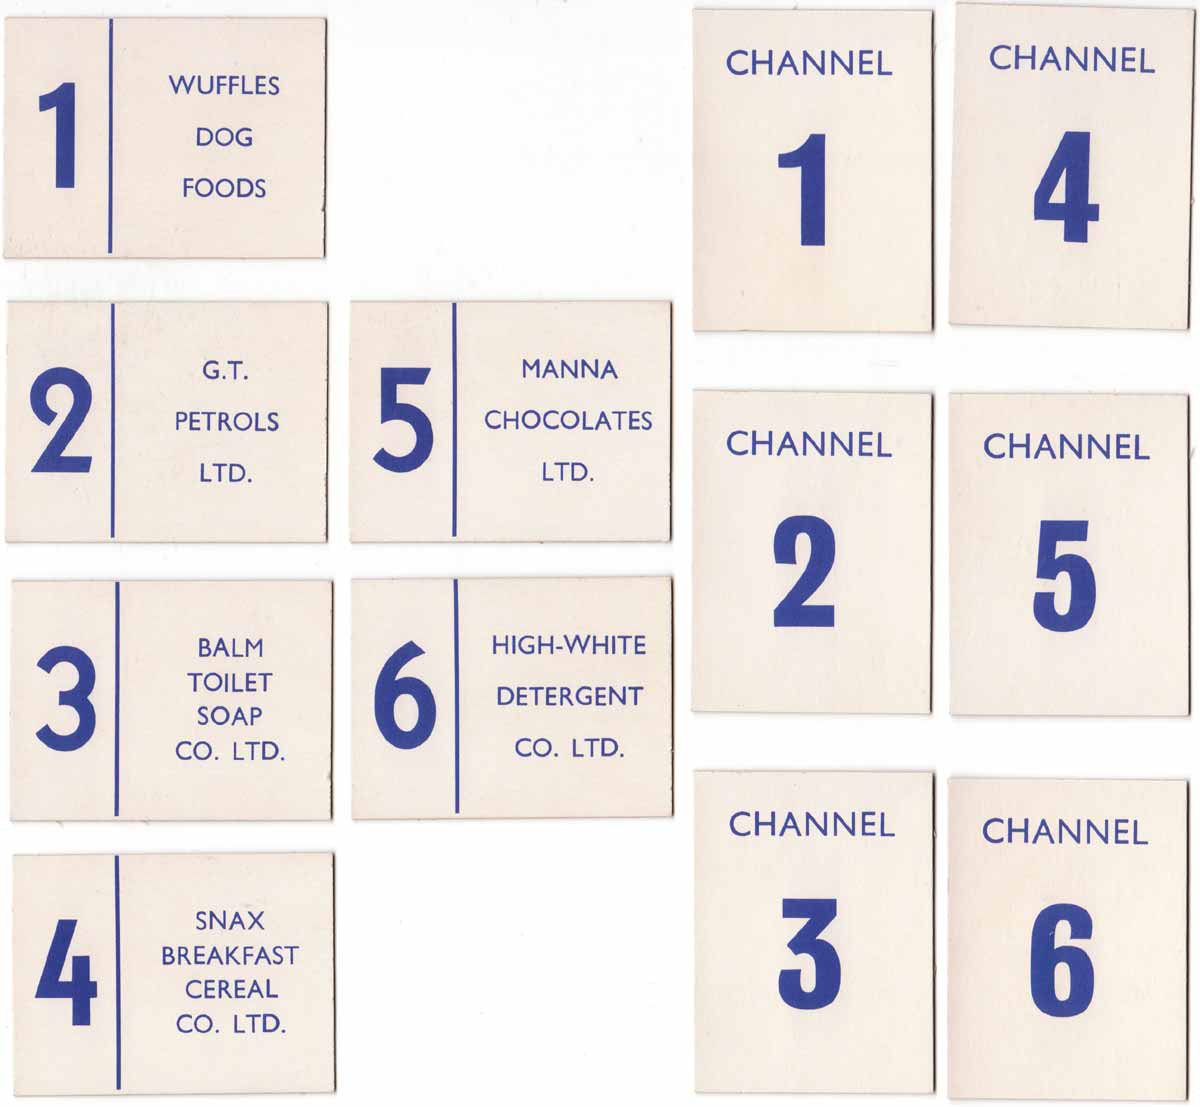 Channel X published by Pepys Games, c.1966